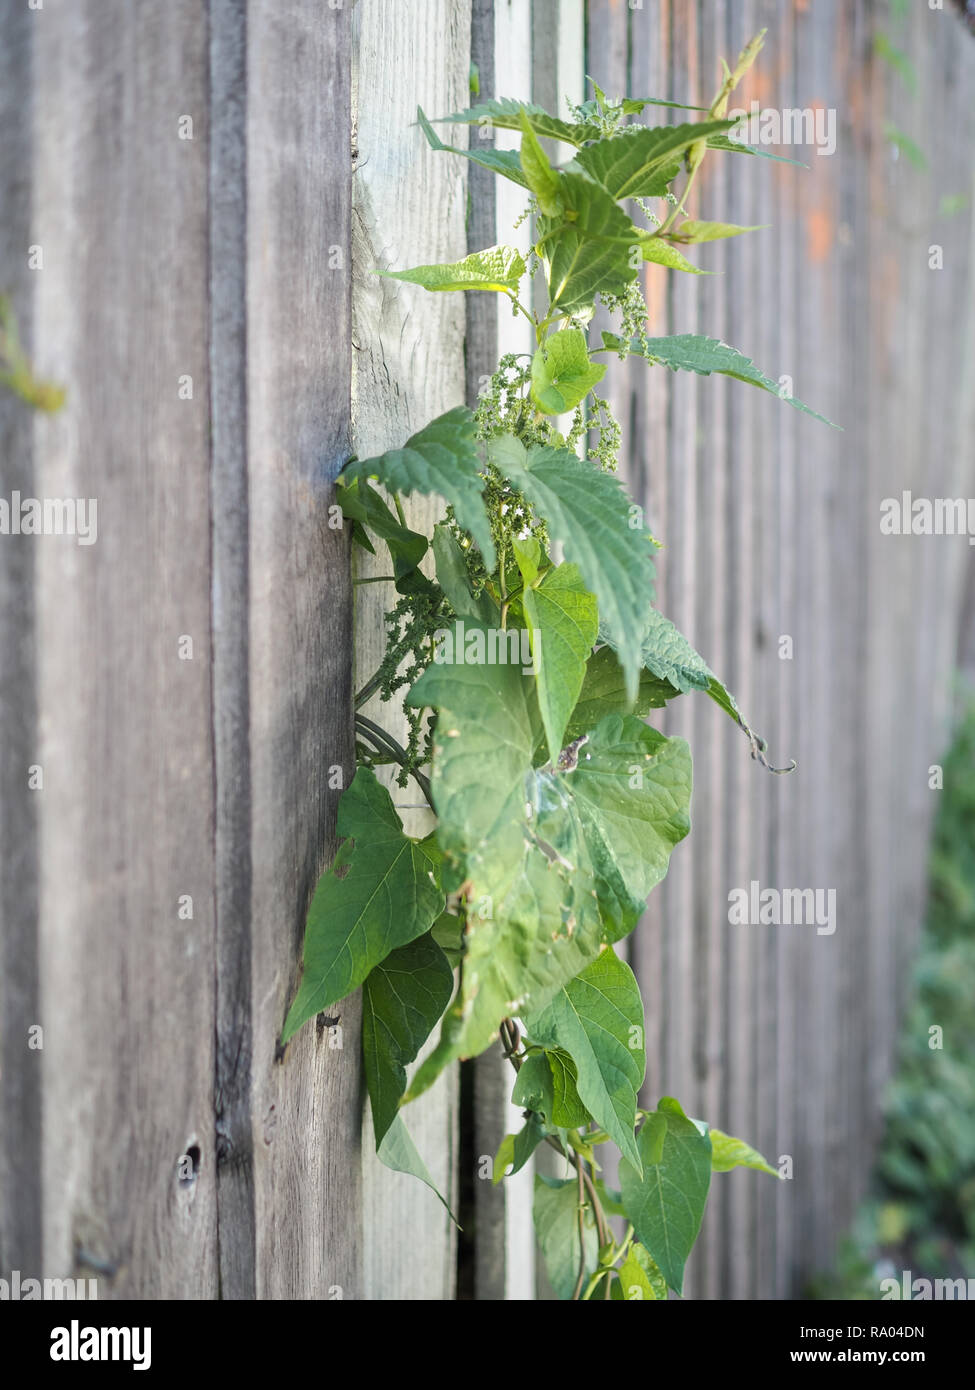 Stinging nettles and bindweed growing through a wooden fence Stock Photo